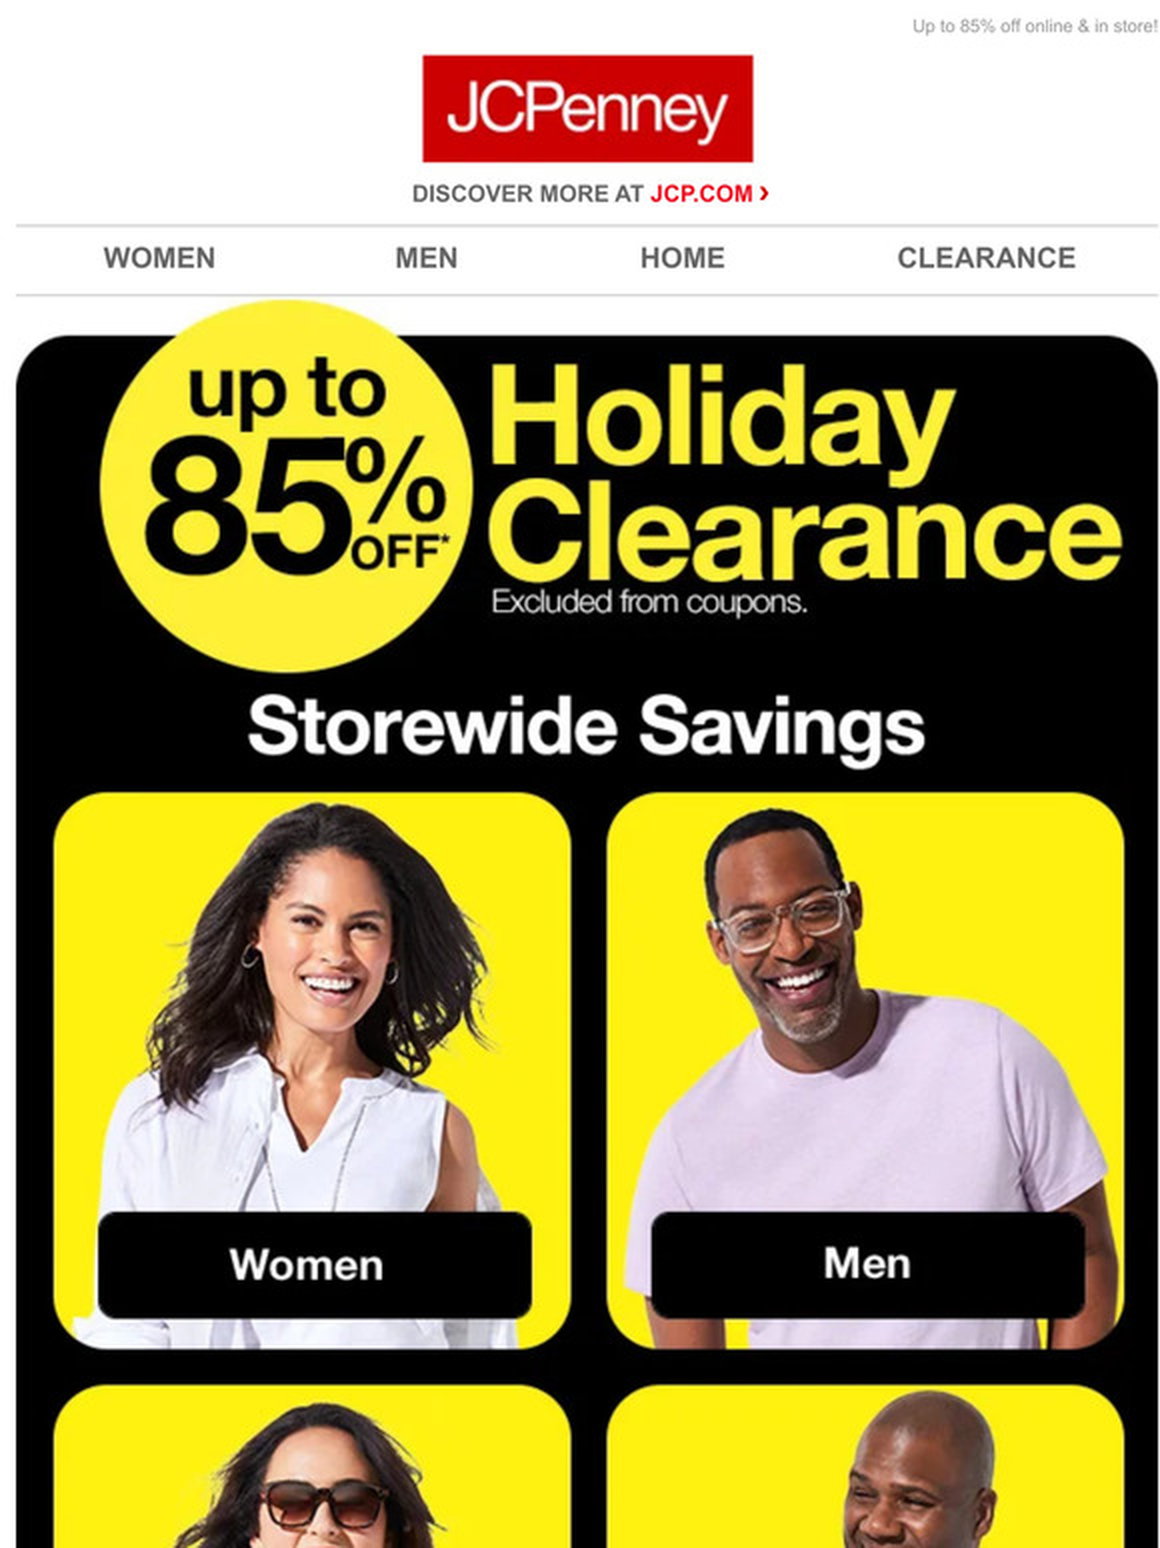 JC Penney: It's a takeover! 👀 DoorBusters, Clearance, Home Sale!